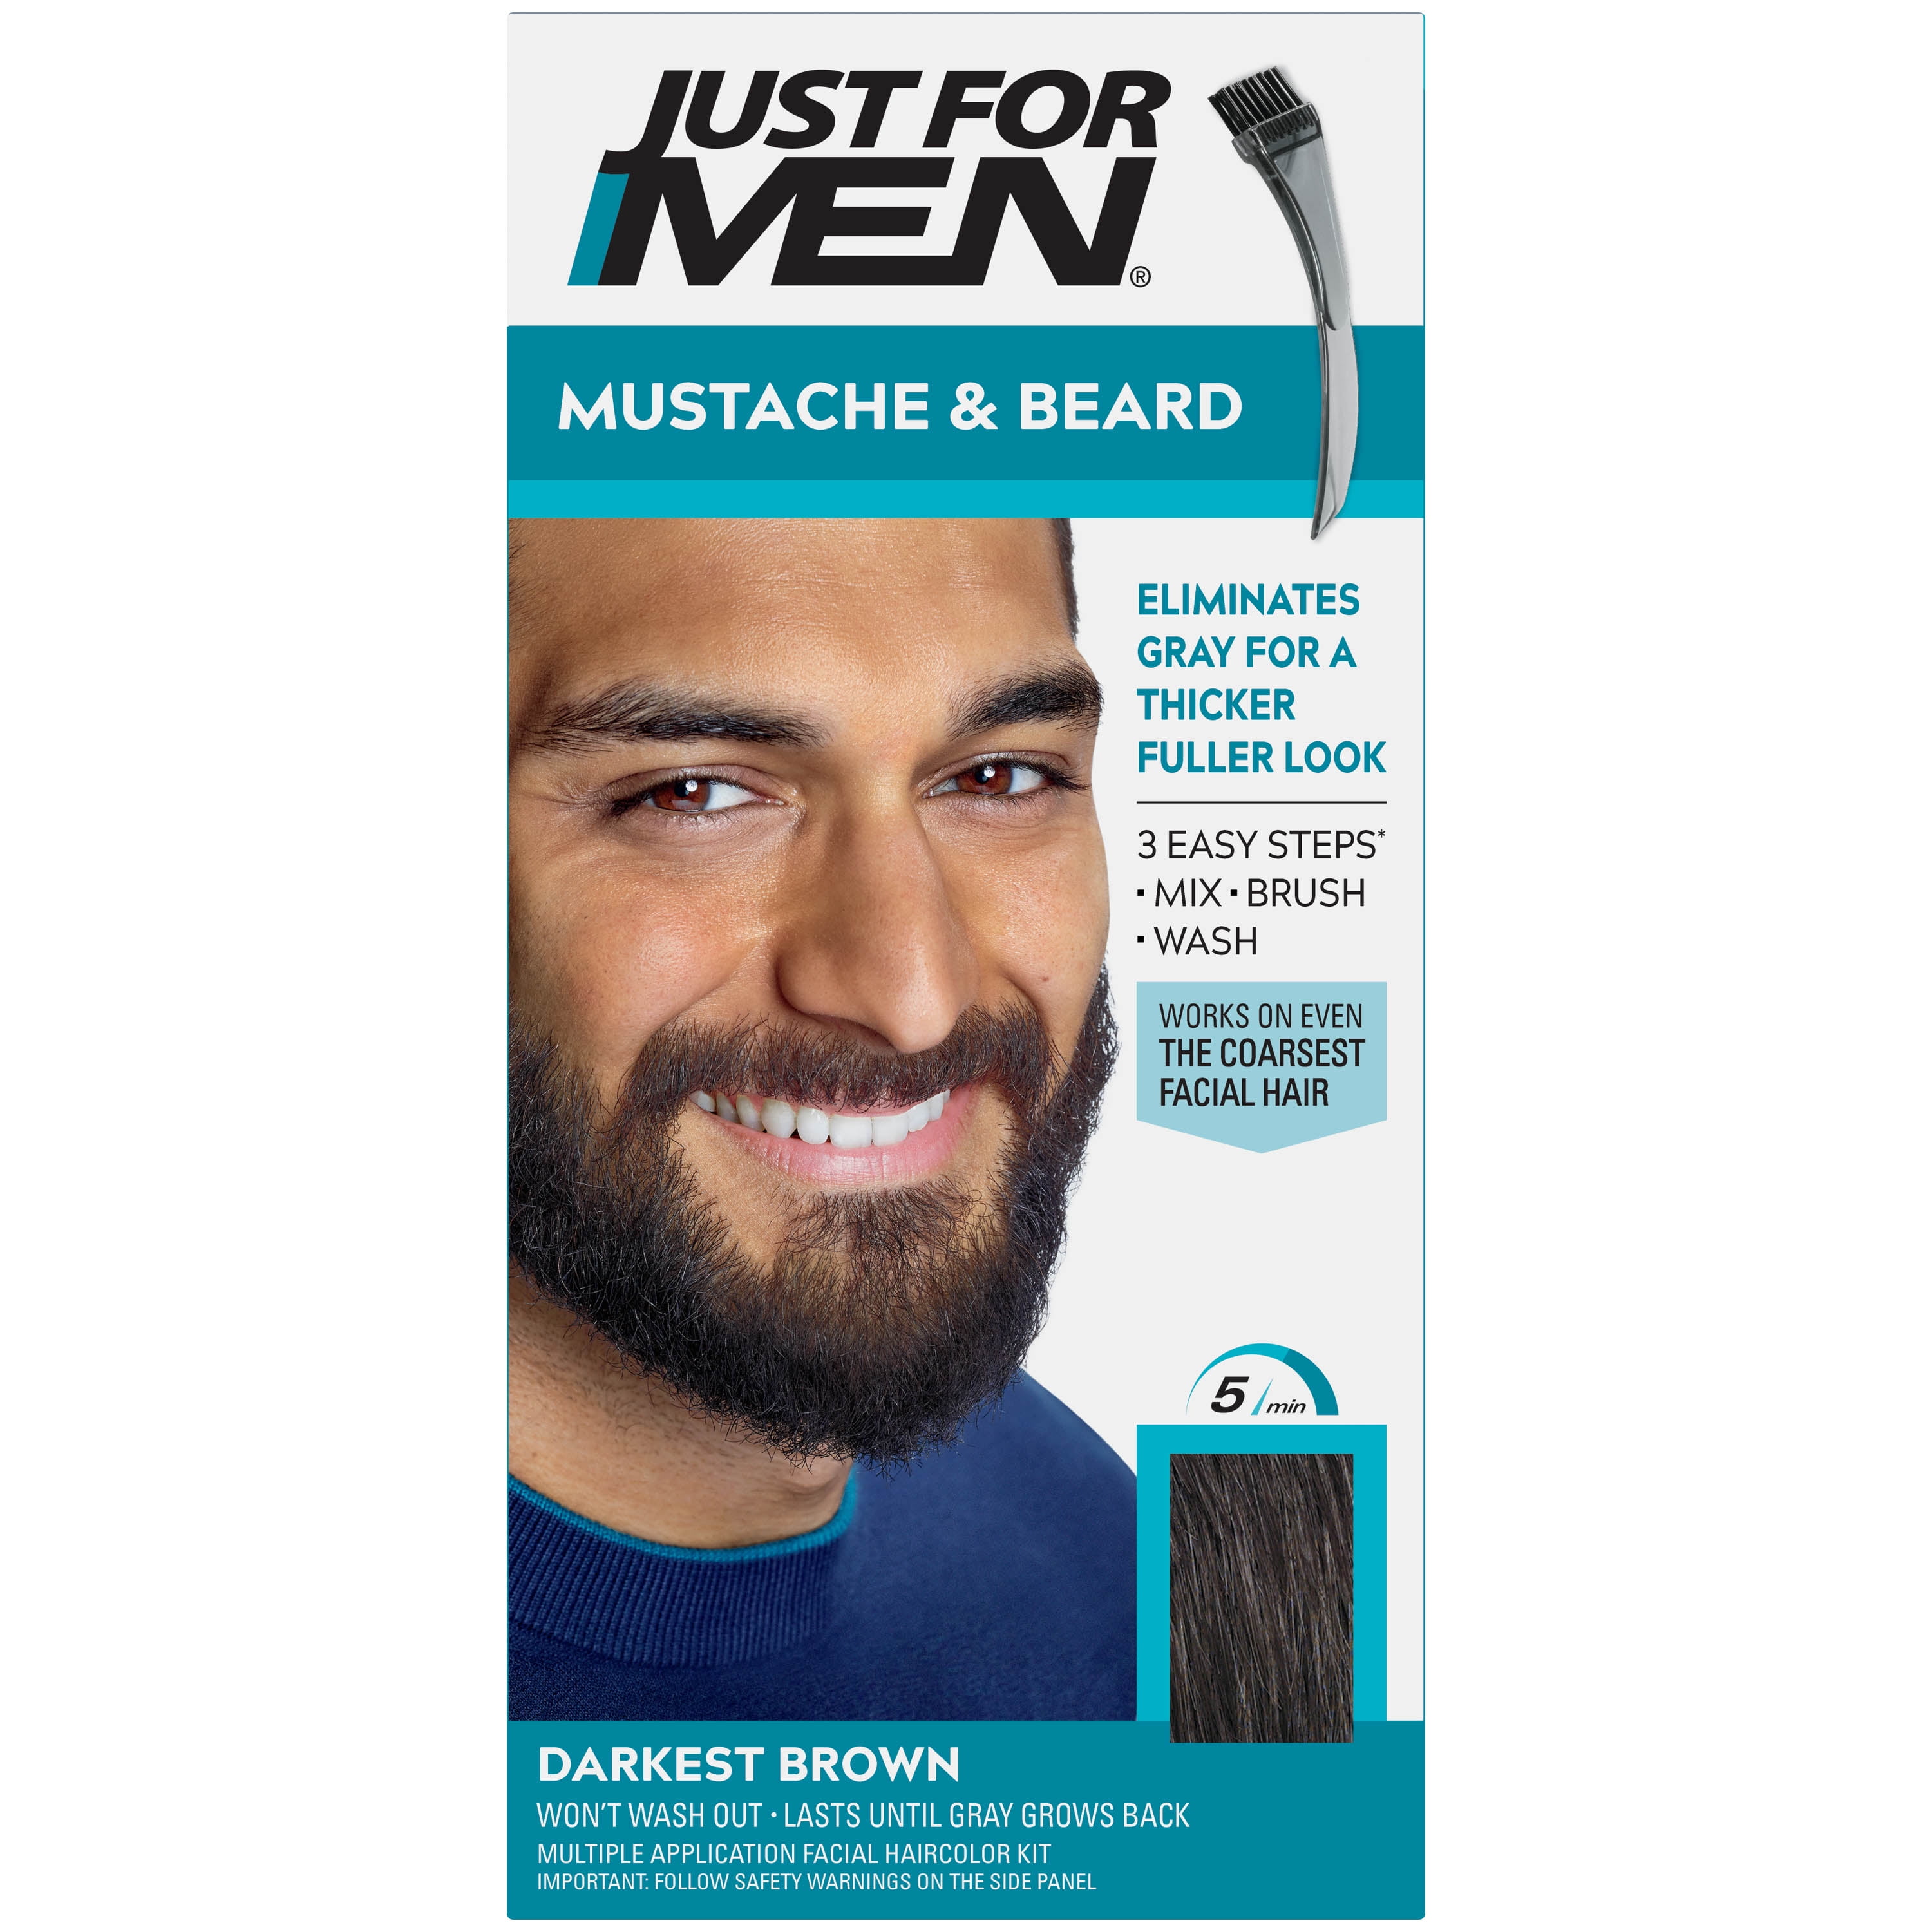 Just For Men Mustache & Beard Hair Color for Reducing Gray, M-25 Light  Brown 